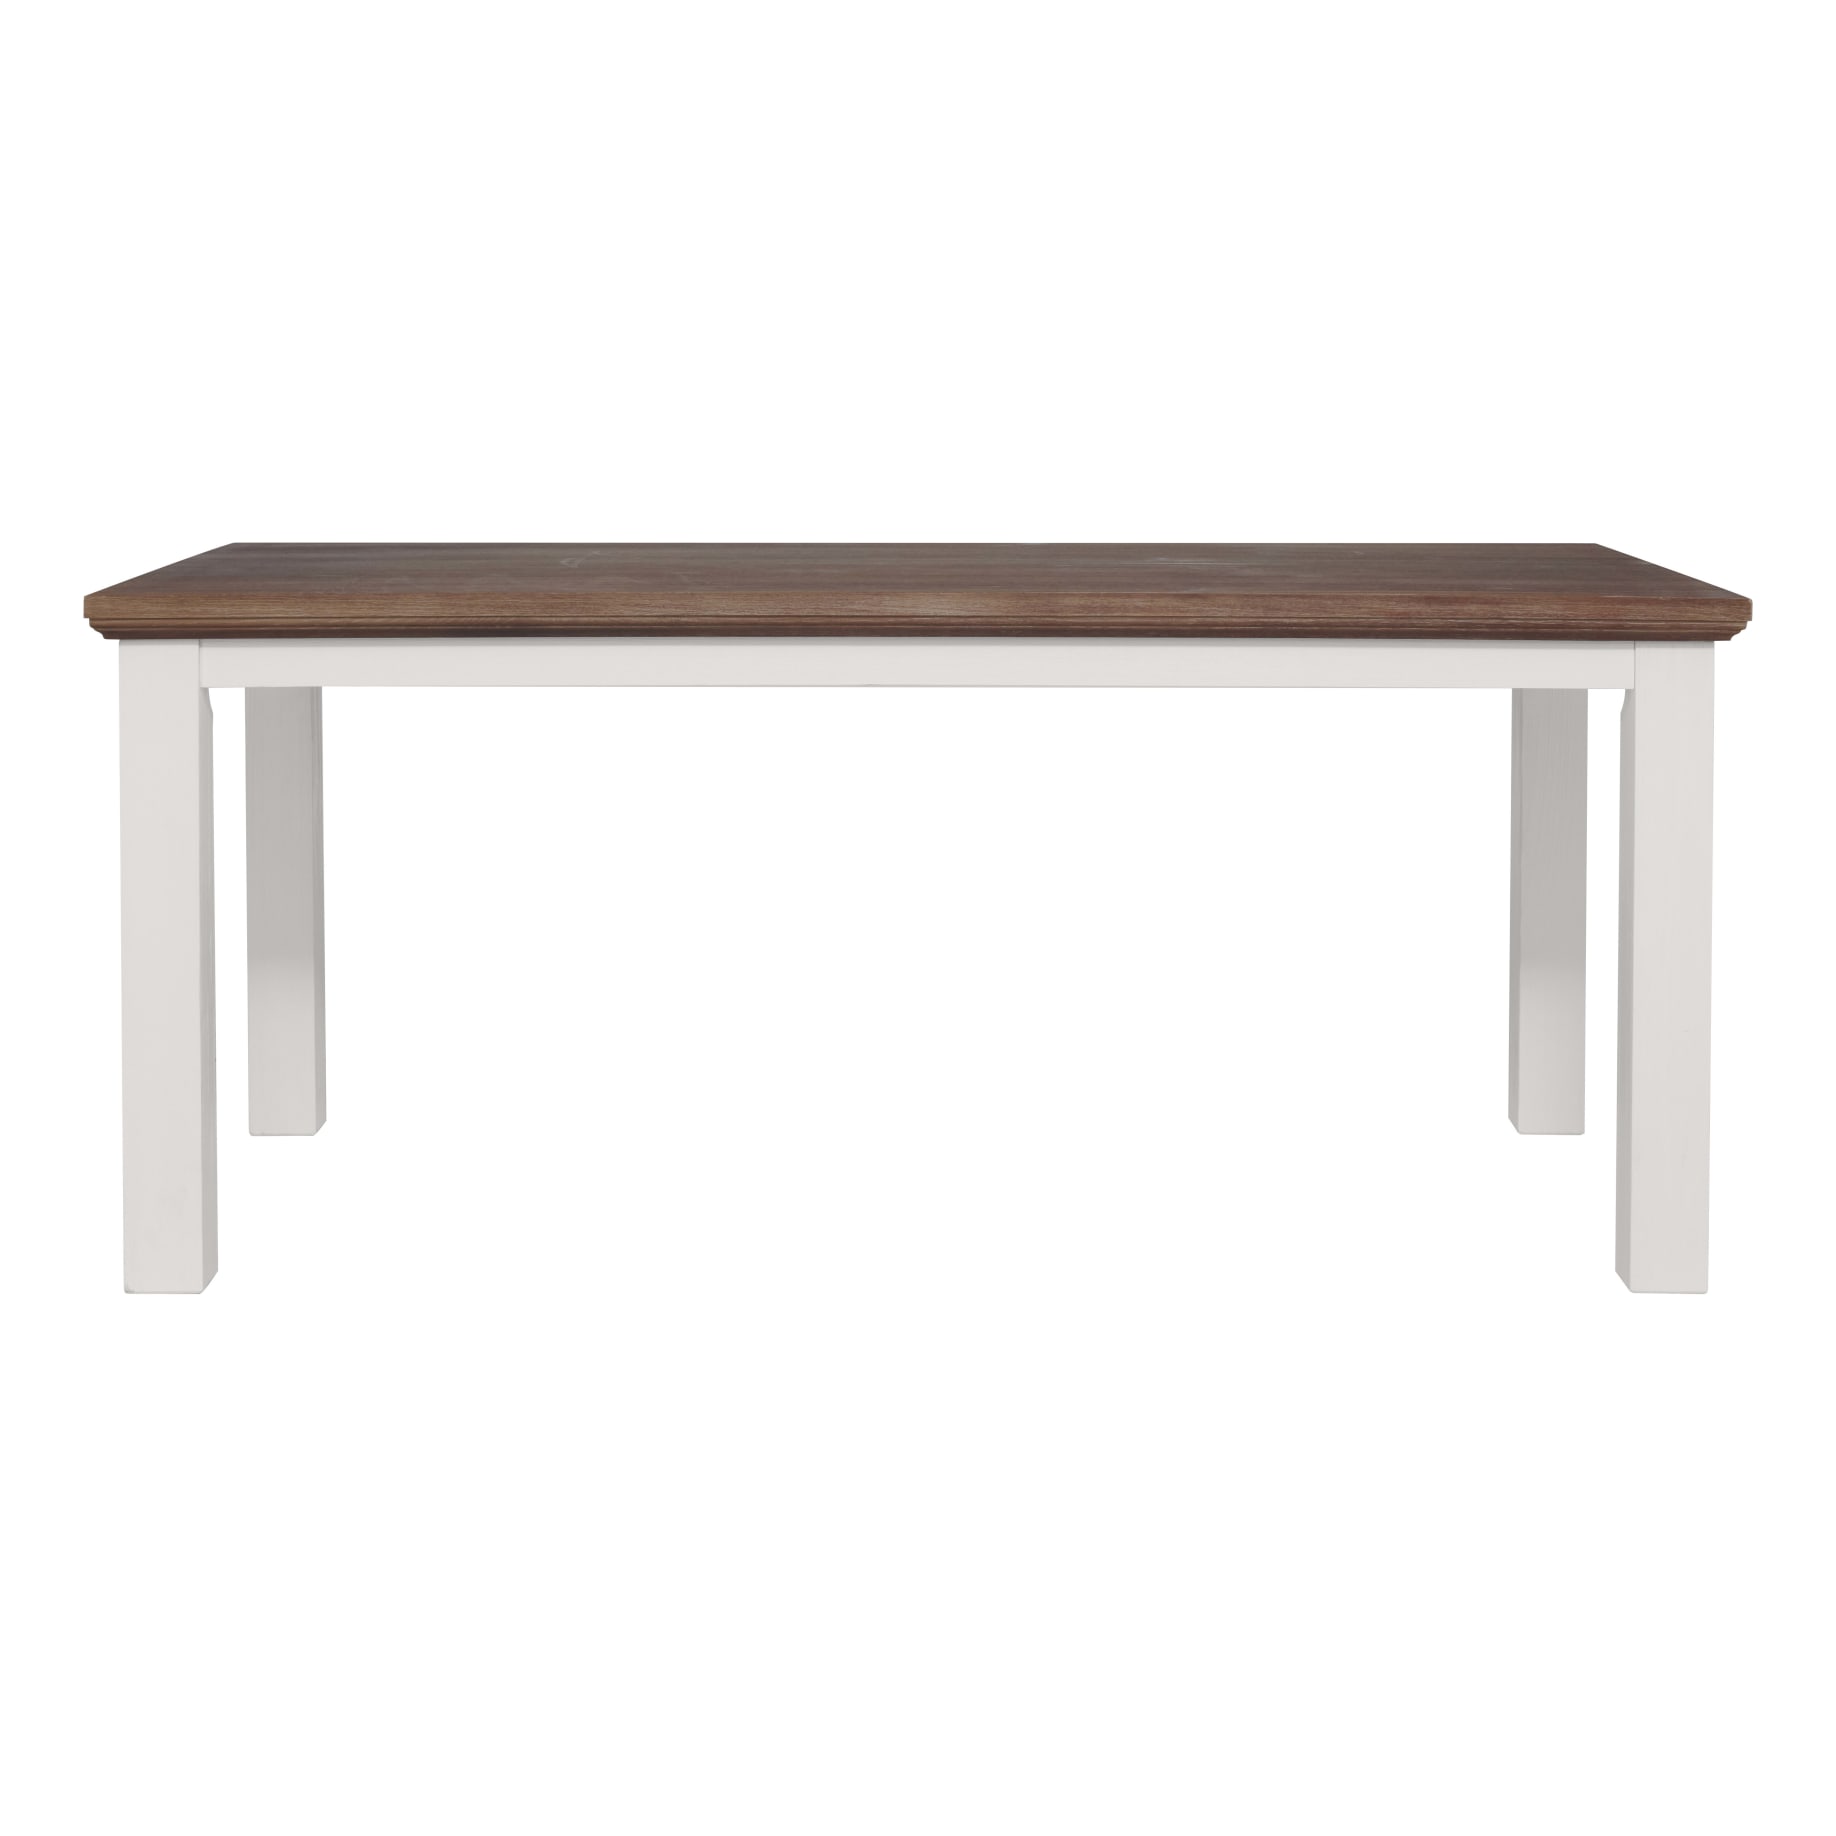 Hamptons Dining Table 220cm in Two Tone